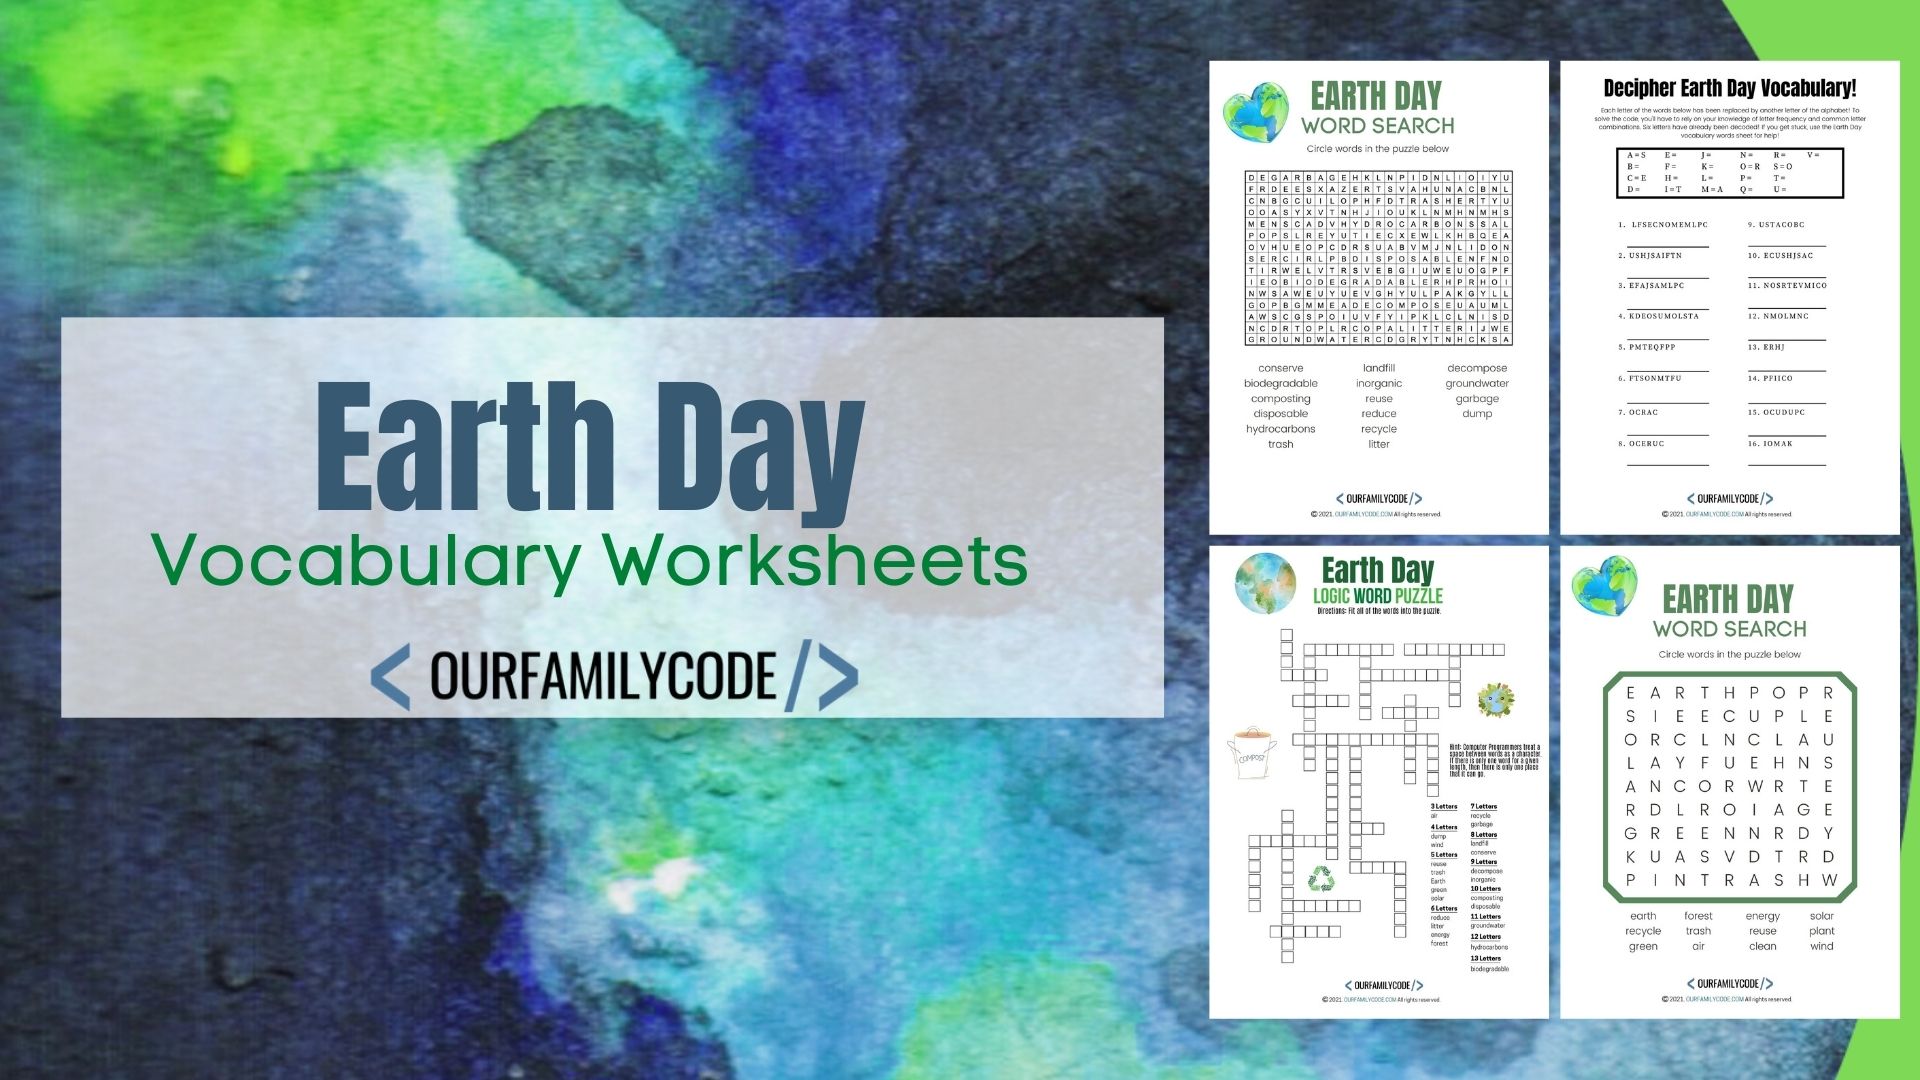 A picture with four Earth Day vocabulary worksheets displayed on a watercolor blue and green background.